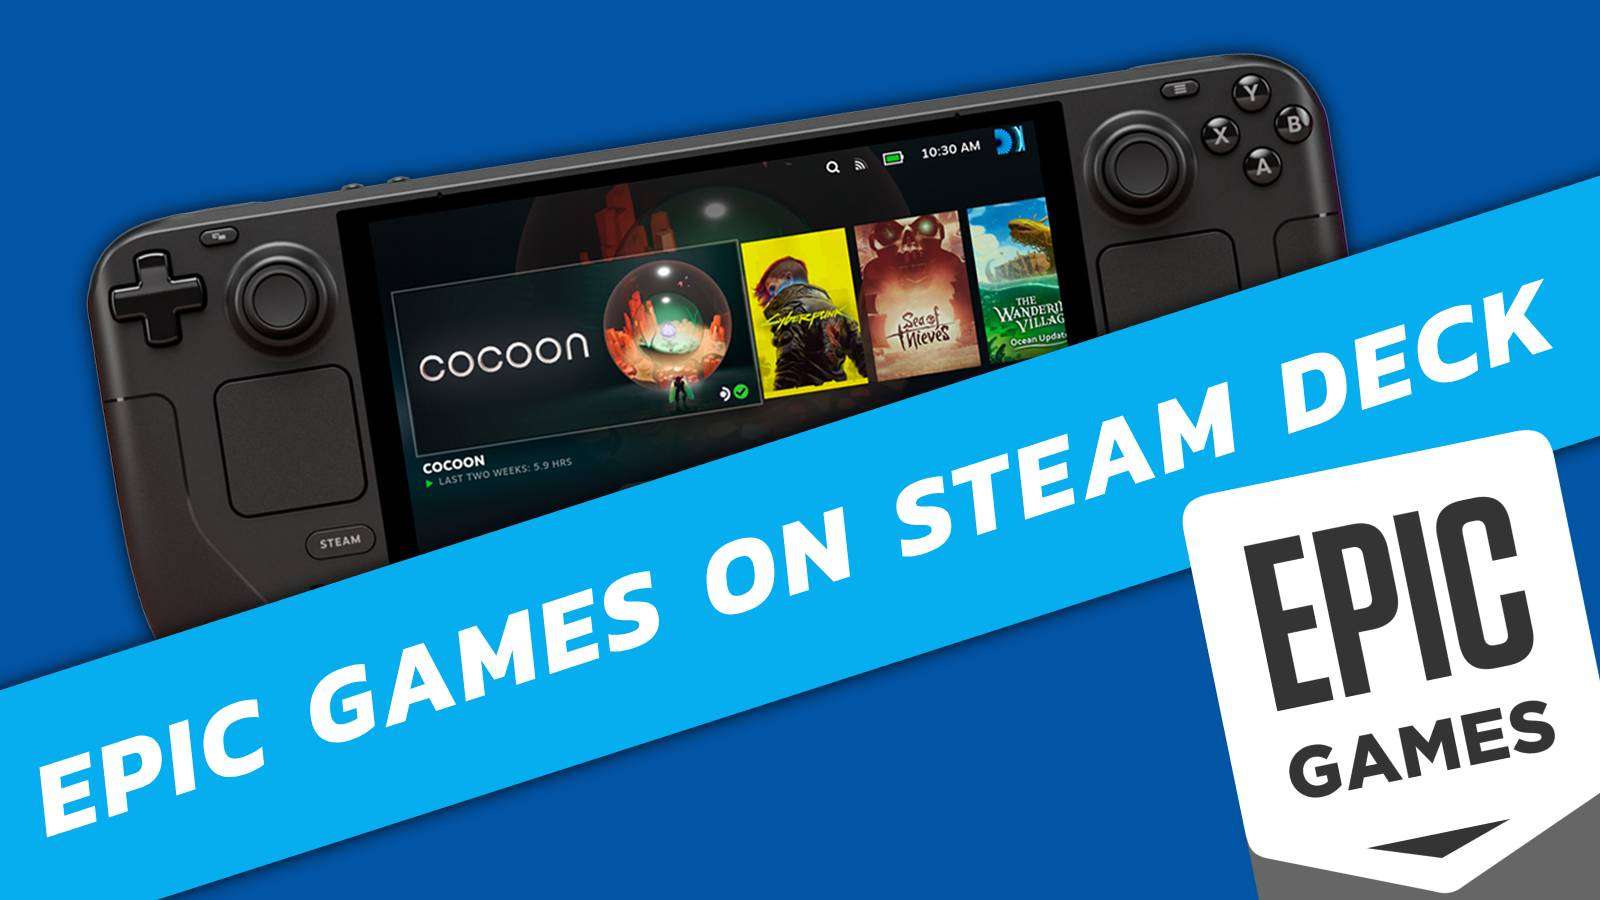 Image of the Steam Deck, on a blue background, with the Epic Games Store logo in the bottom-right corner.